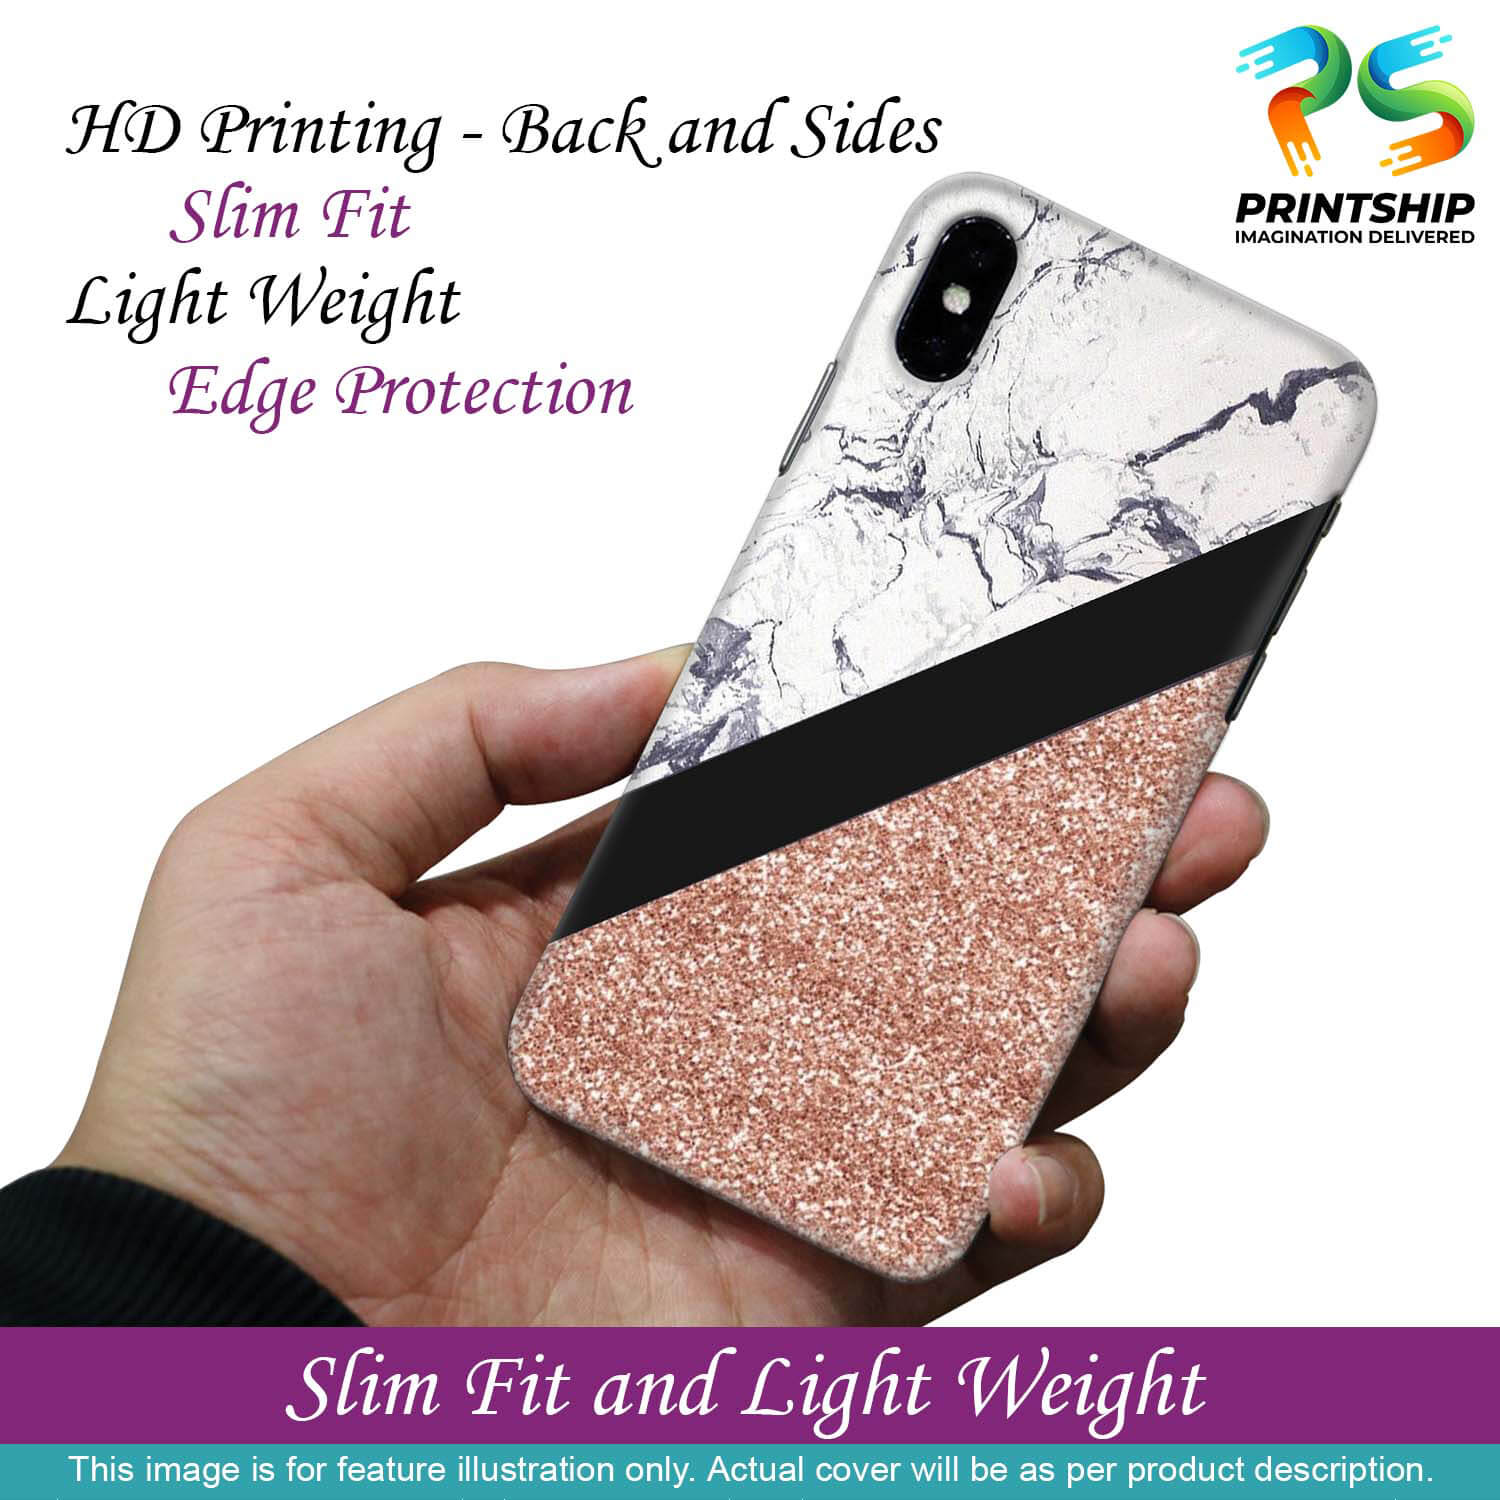 PS1331-Marble and More Back Cover for Xiaomi Redmi K20 and K20 Pro